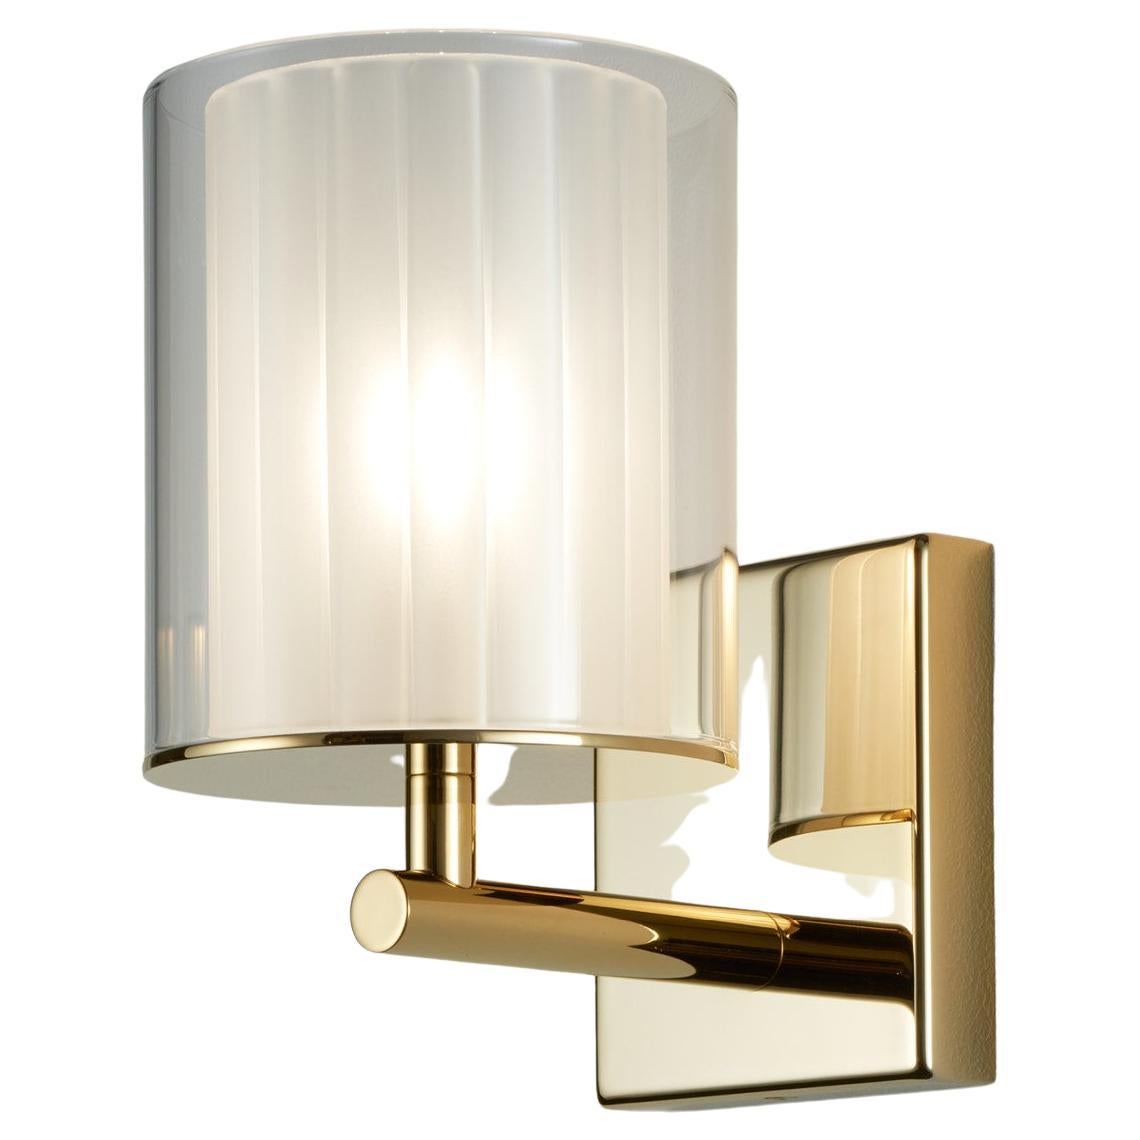 Flute Wall Light XL in Polished Gold with Frosted Glass Diffuser, UL Listed